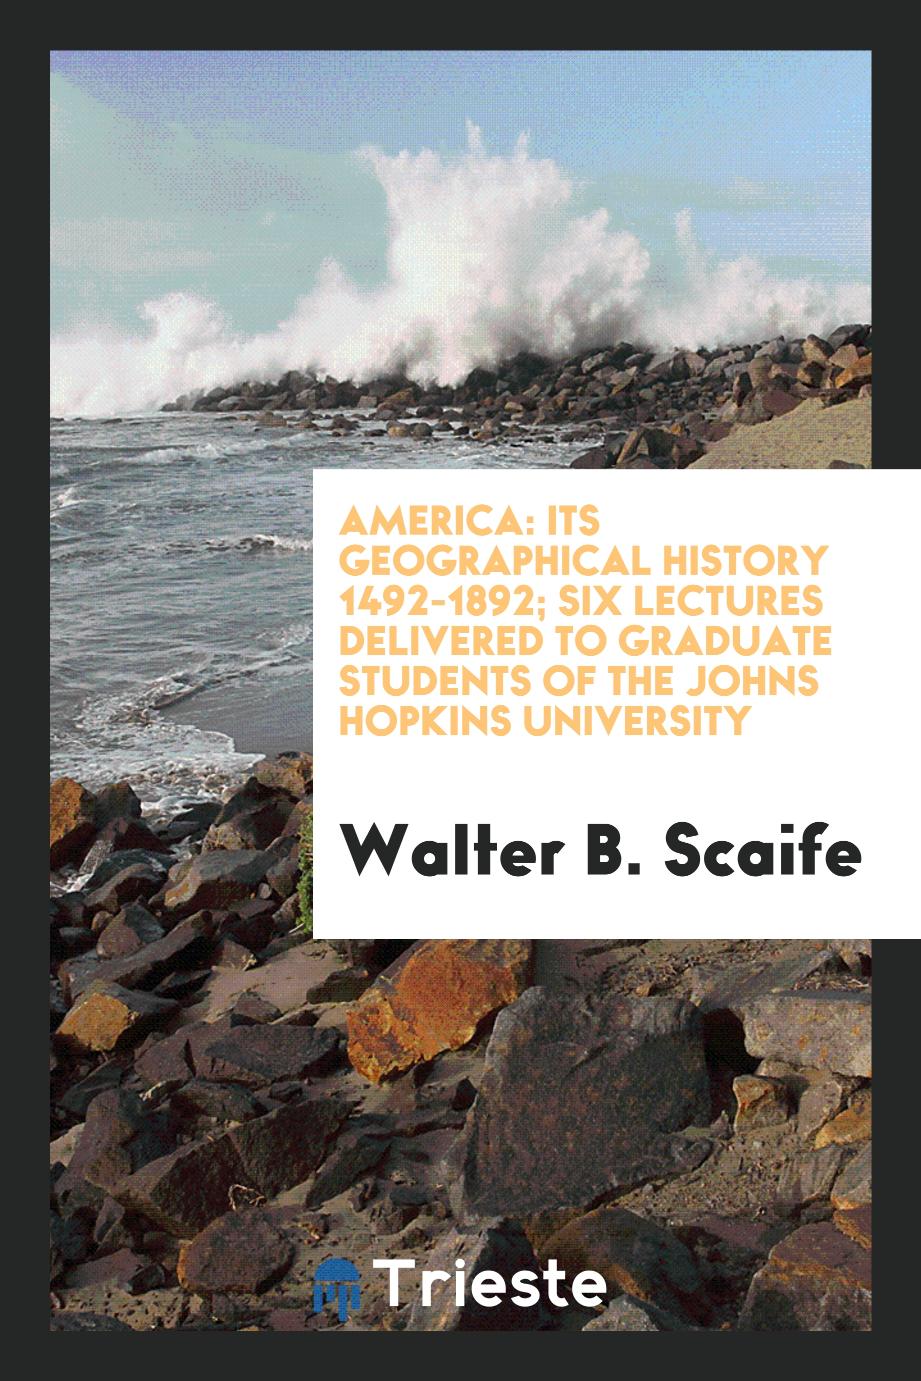 America: its geographical history 1492-1892; six lectures delivered to graduate students of the Johns Hopkins University